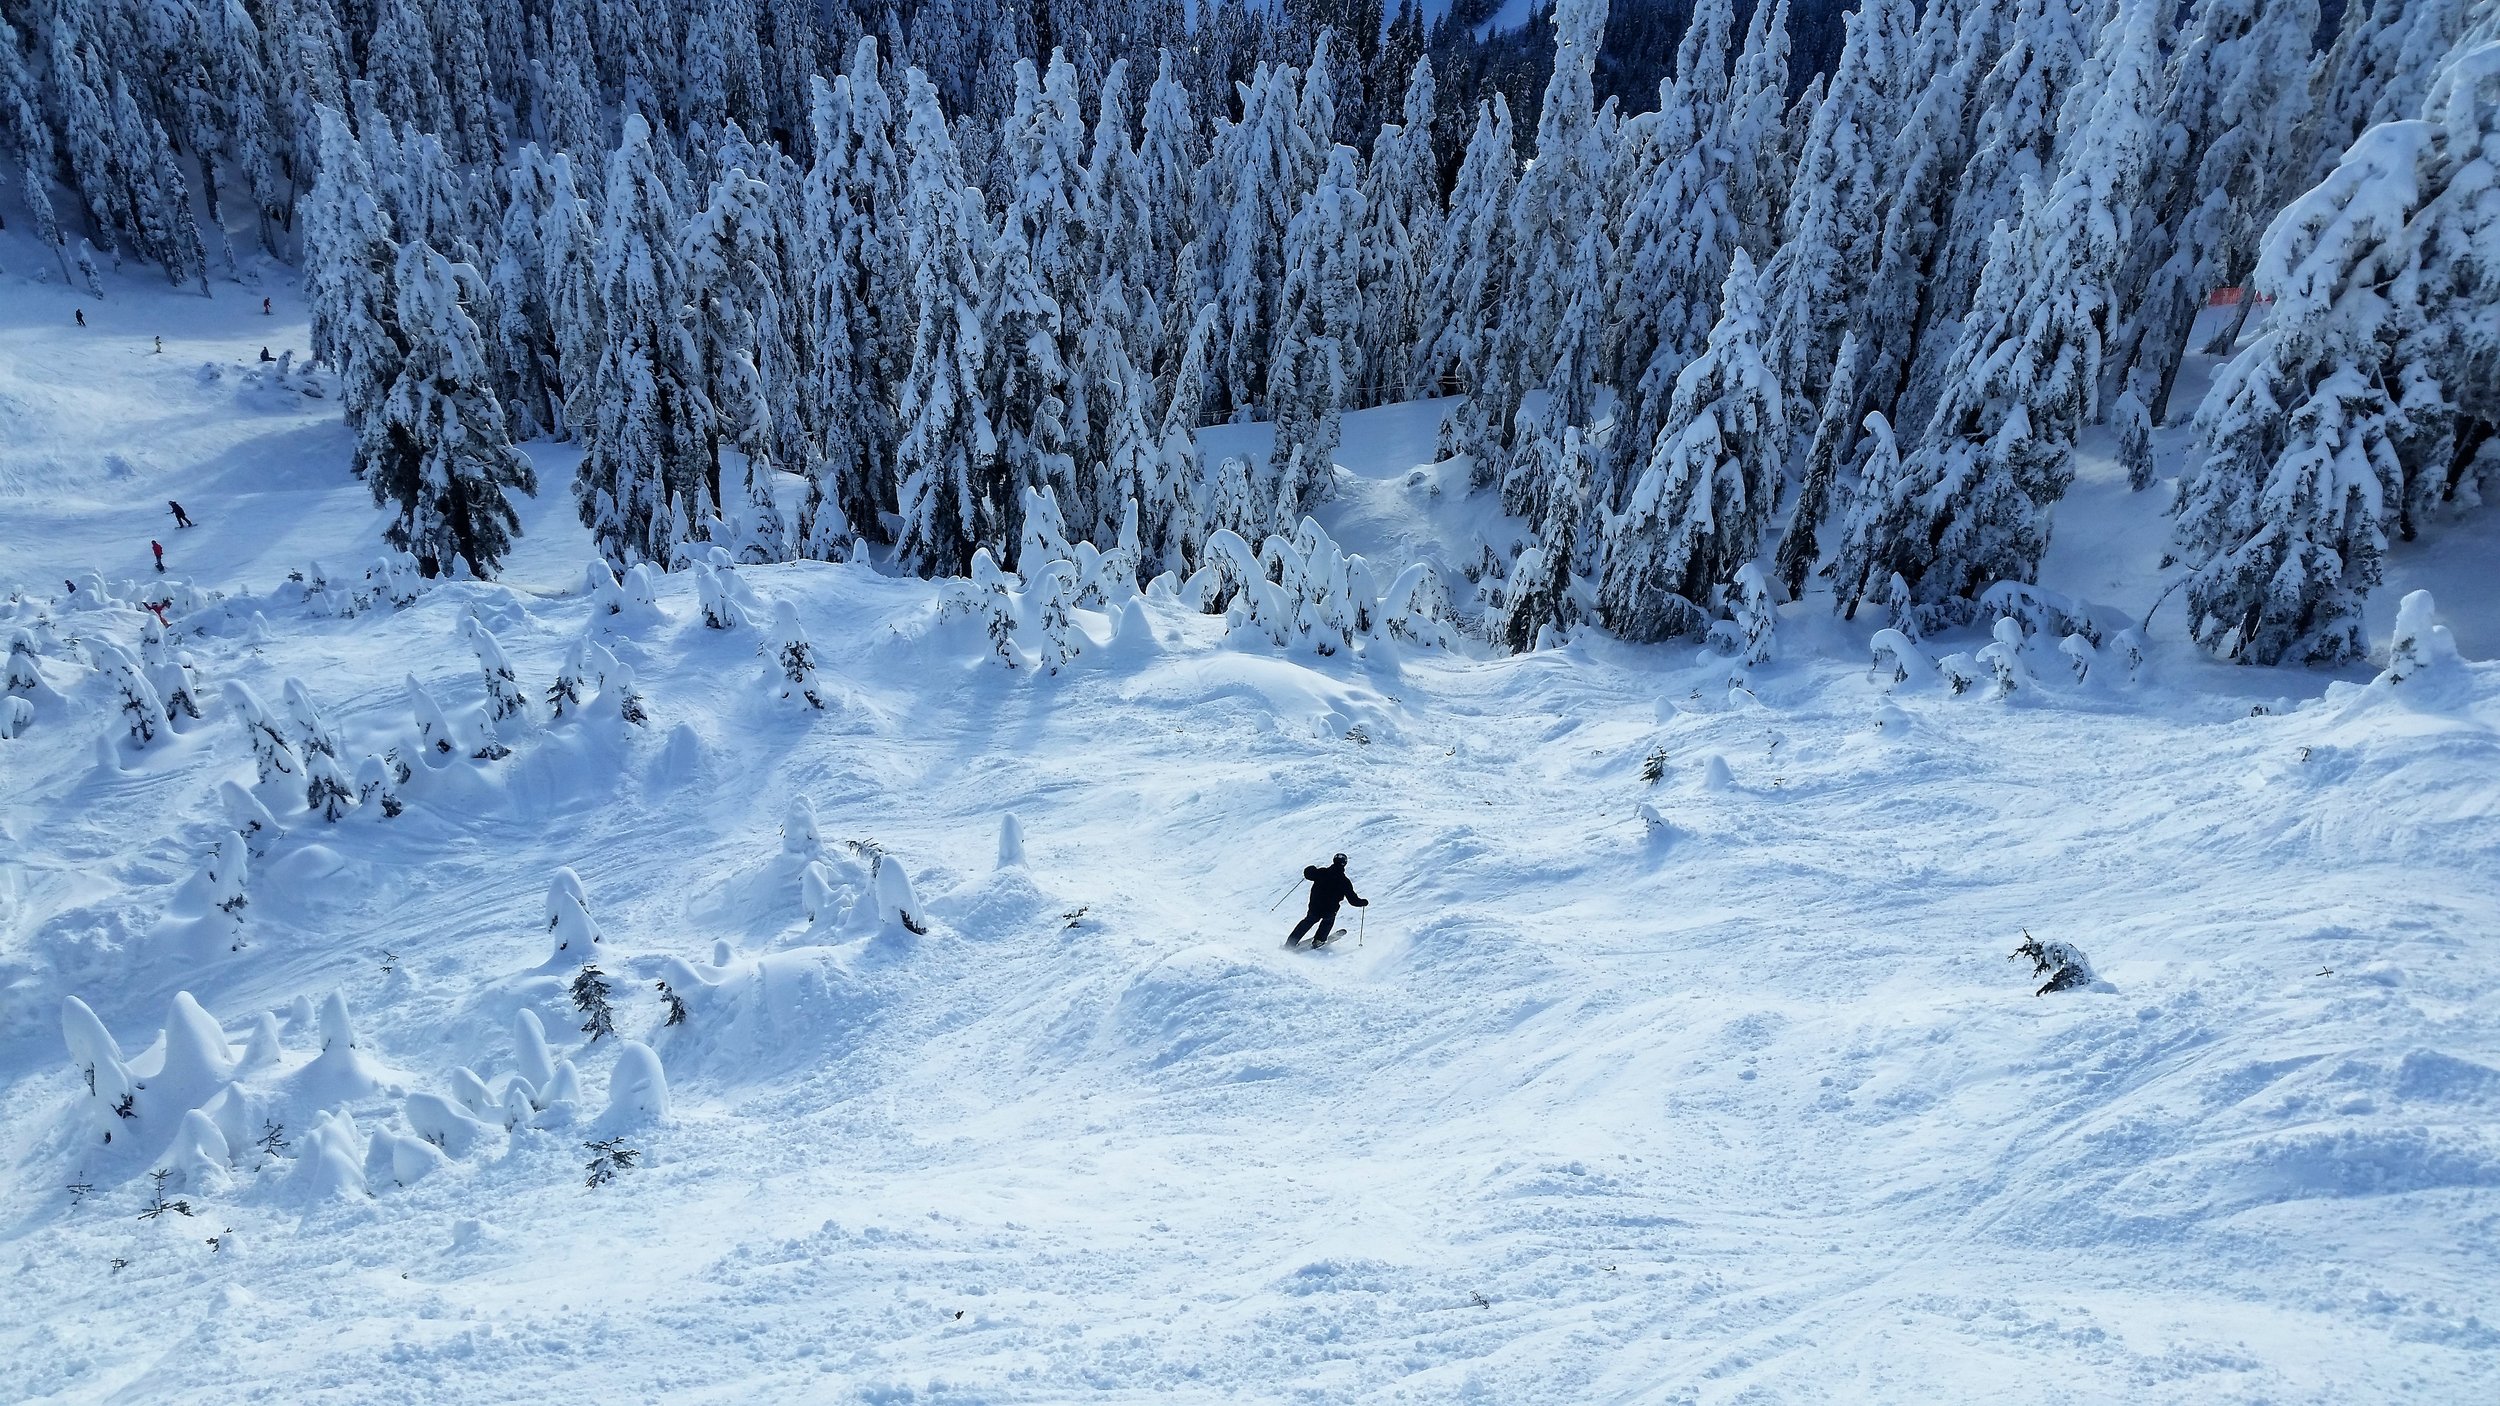 Enjoying a mogul run at the local mountains in Vancouver